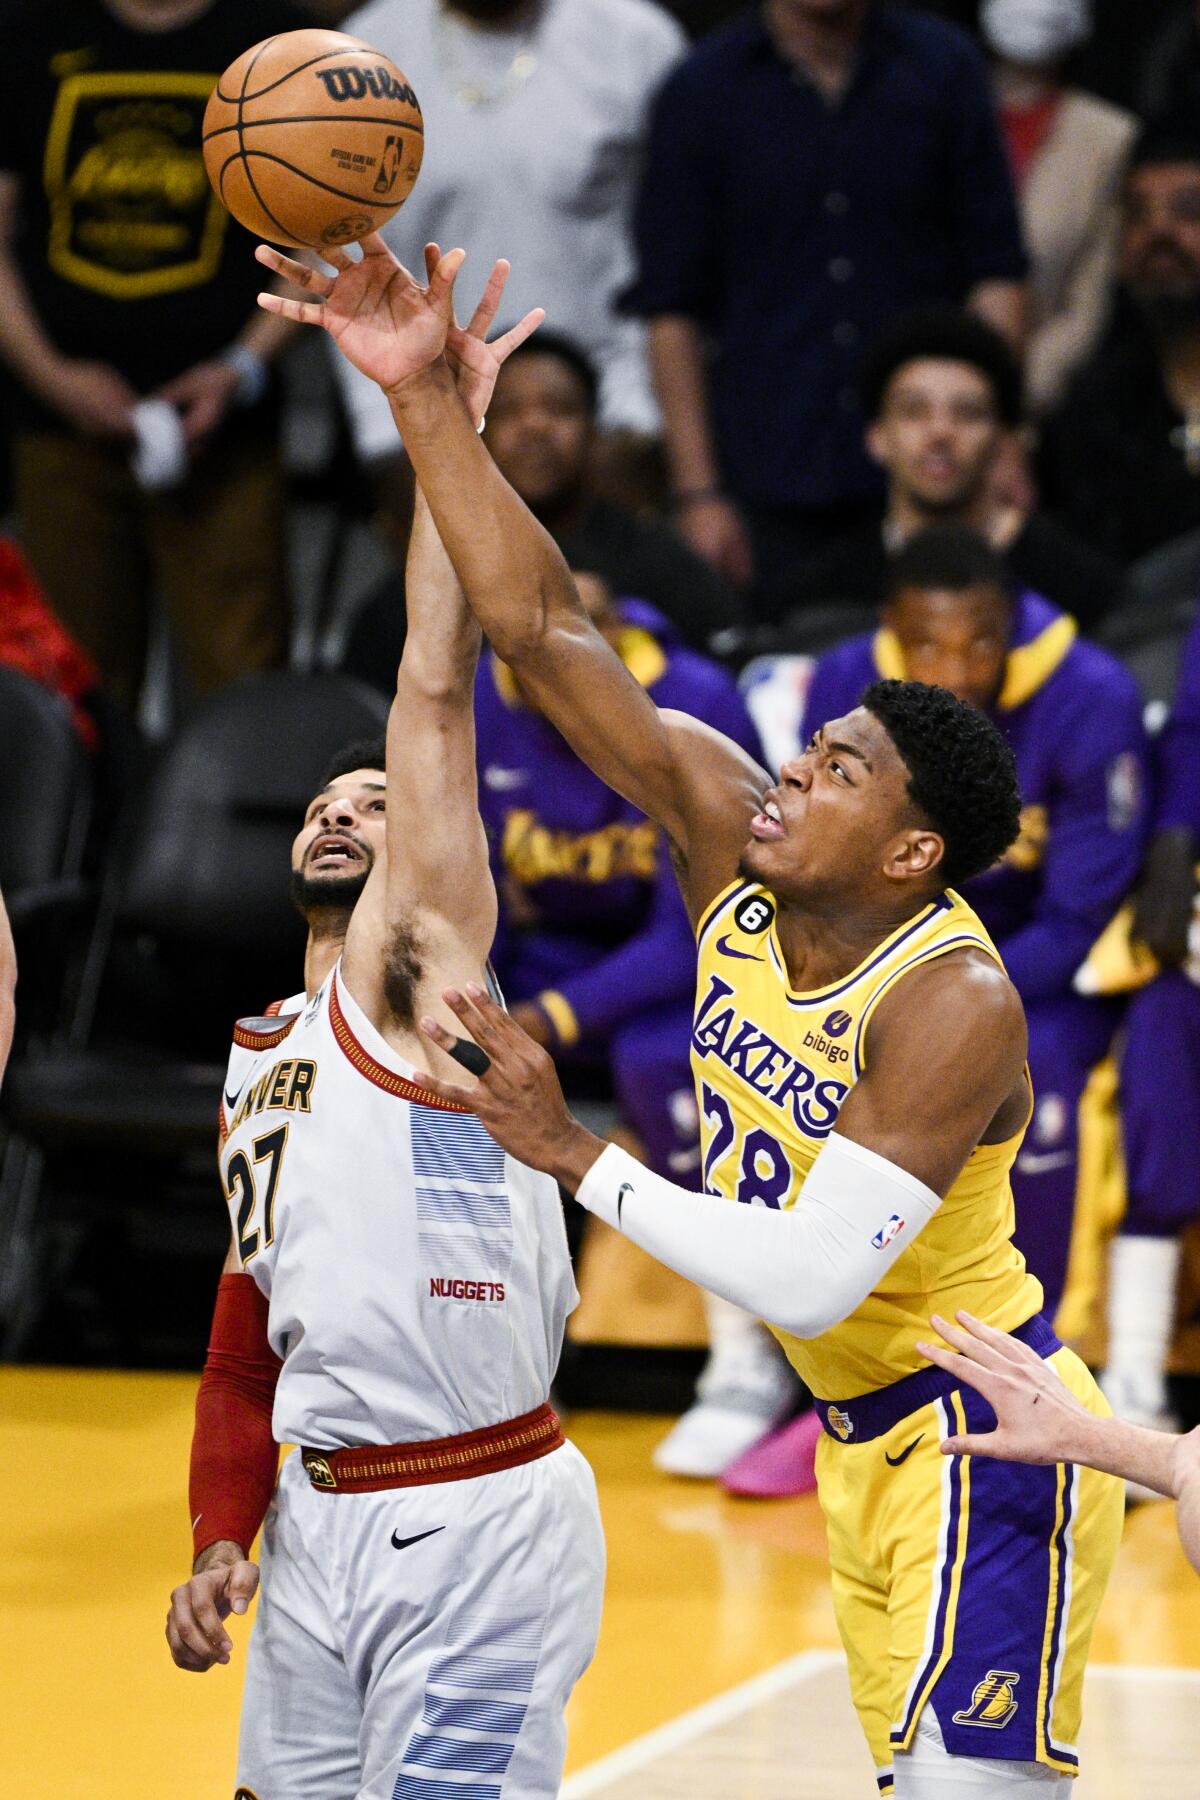 Lakers forward Rui Hachimura, right, goes up for a shot while defended by Nuggets guard Jamal Murray.